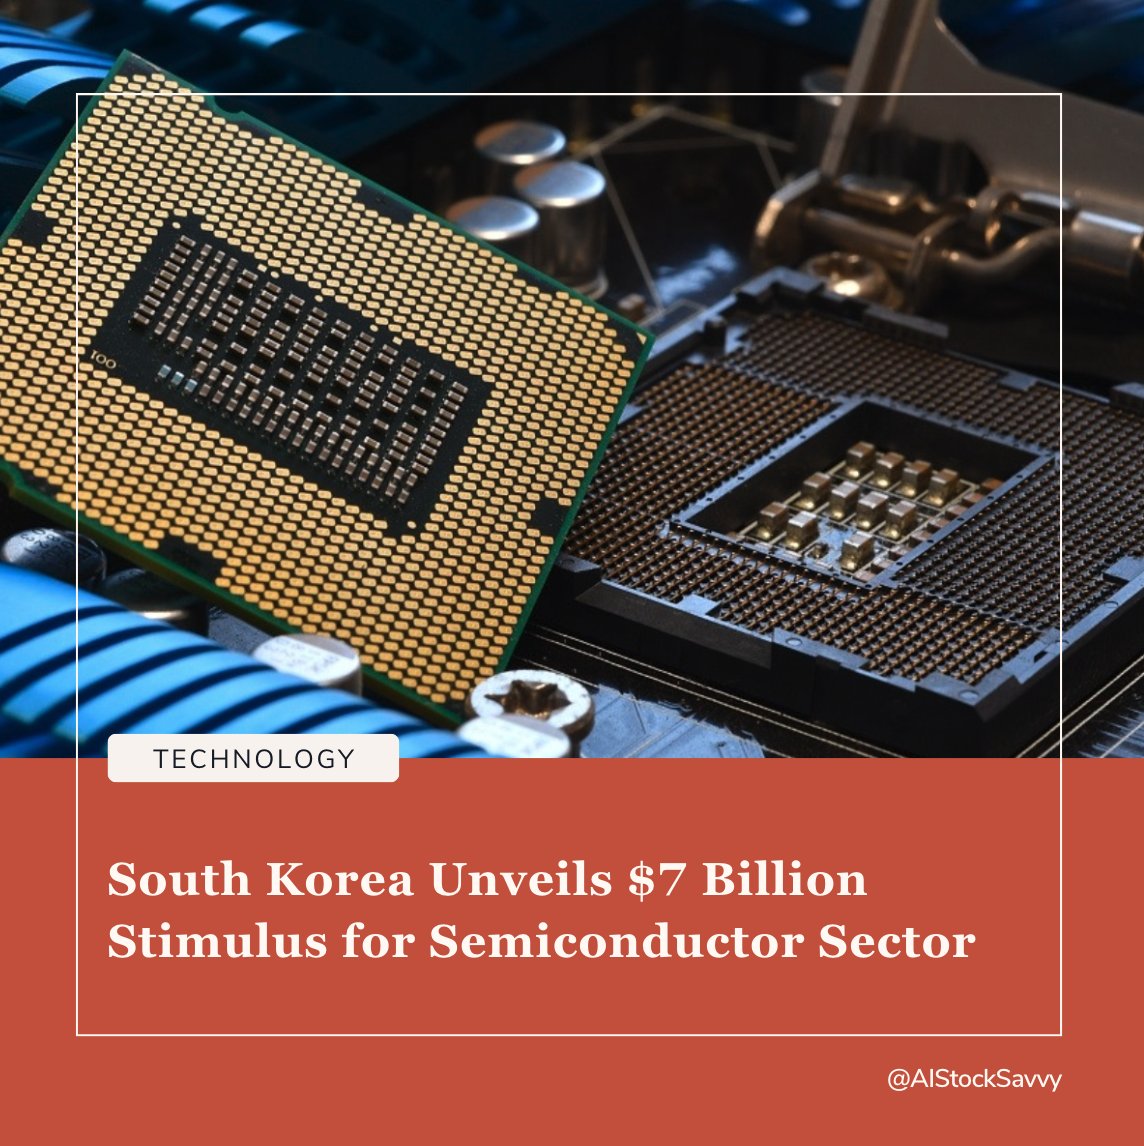 📣 JUST IN: South Korea Announces $7B Support for Chip Industry to Boost Global Competitiveness $NVDA $AVGO $MRVL $AMD $INTC $ARM $ALAB $TSM $MU $SMCI 👉 Key Highlights: 📍 South Korea preps $7.3 billion support package for semiconductor industry. 📍 Finance Minister Choi…